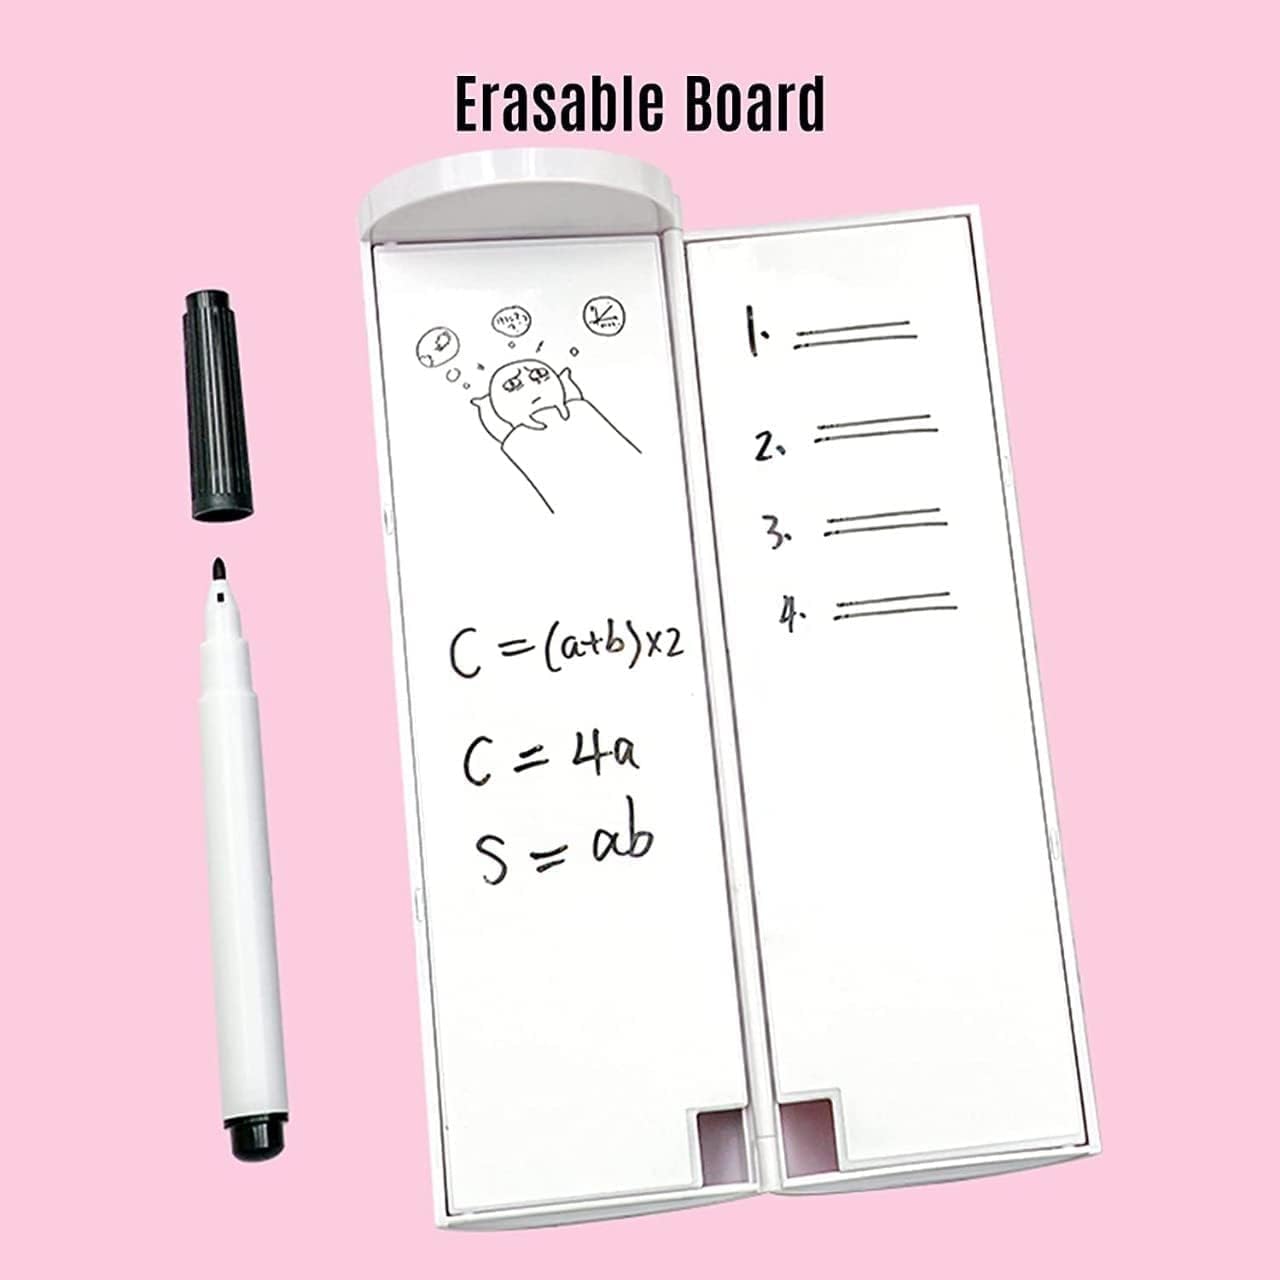 MULTIFUNCTION PENCIL BOX Latest Pencil Box for Girls Kids Multi-Function Pencil Case with Calculator, White Board, Marker & Storage,School Box for Girls Compass Accessories